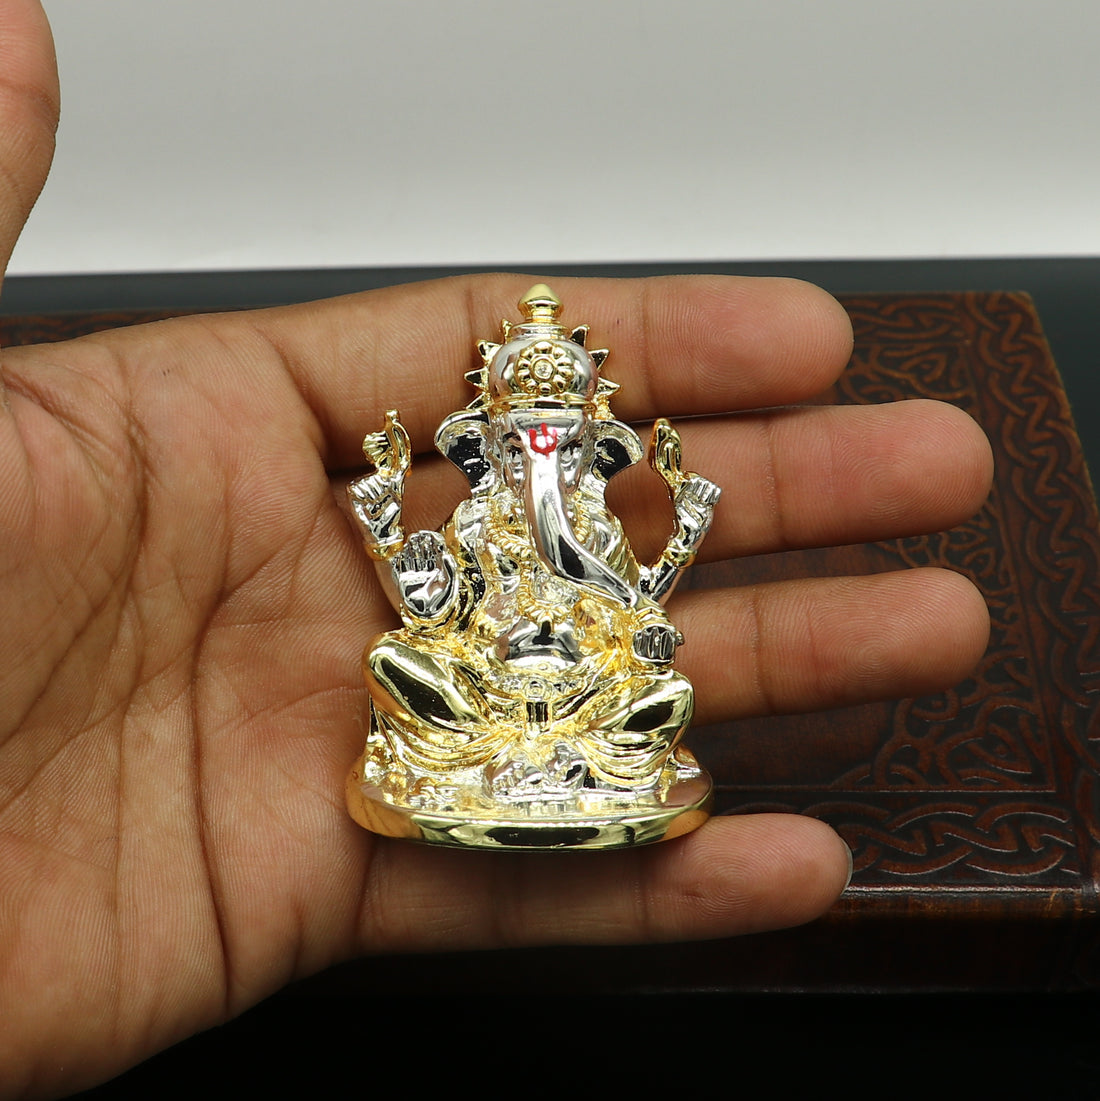 Goddess Laxmi or lord Ganesha Outside Gold or Silver Covering Inside Wax and Marble Silver Idol W7 - TRIBAL ORNAMENTS